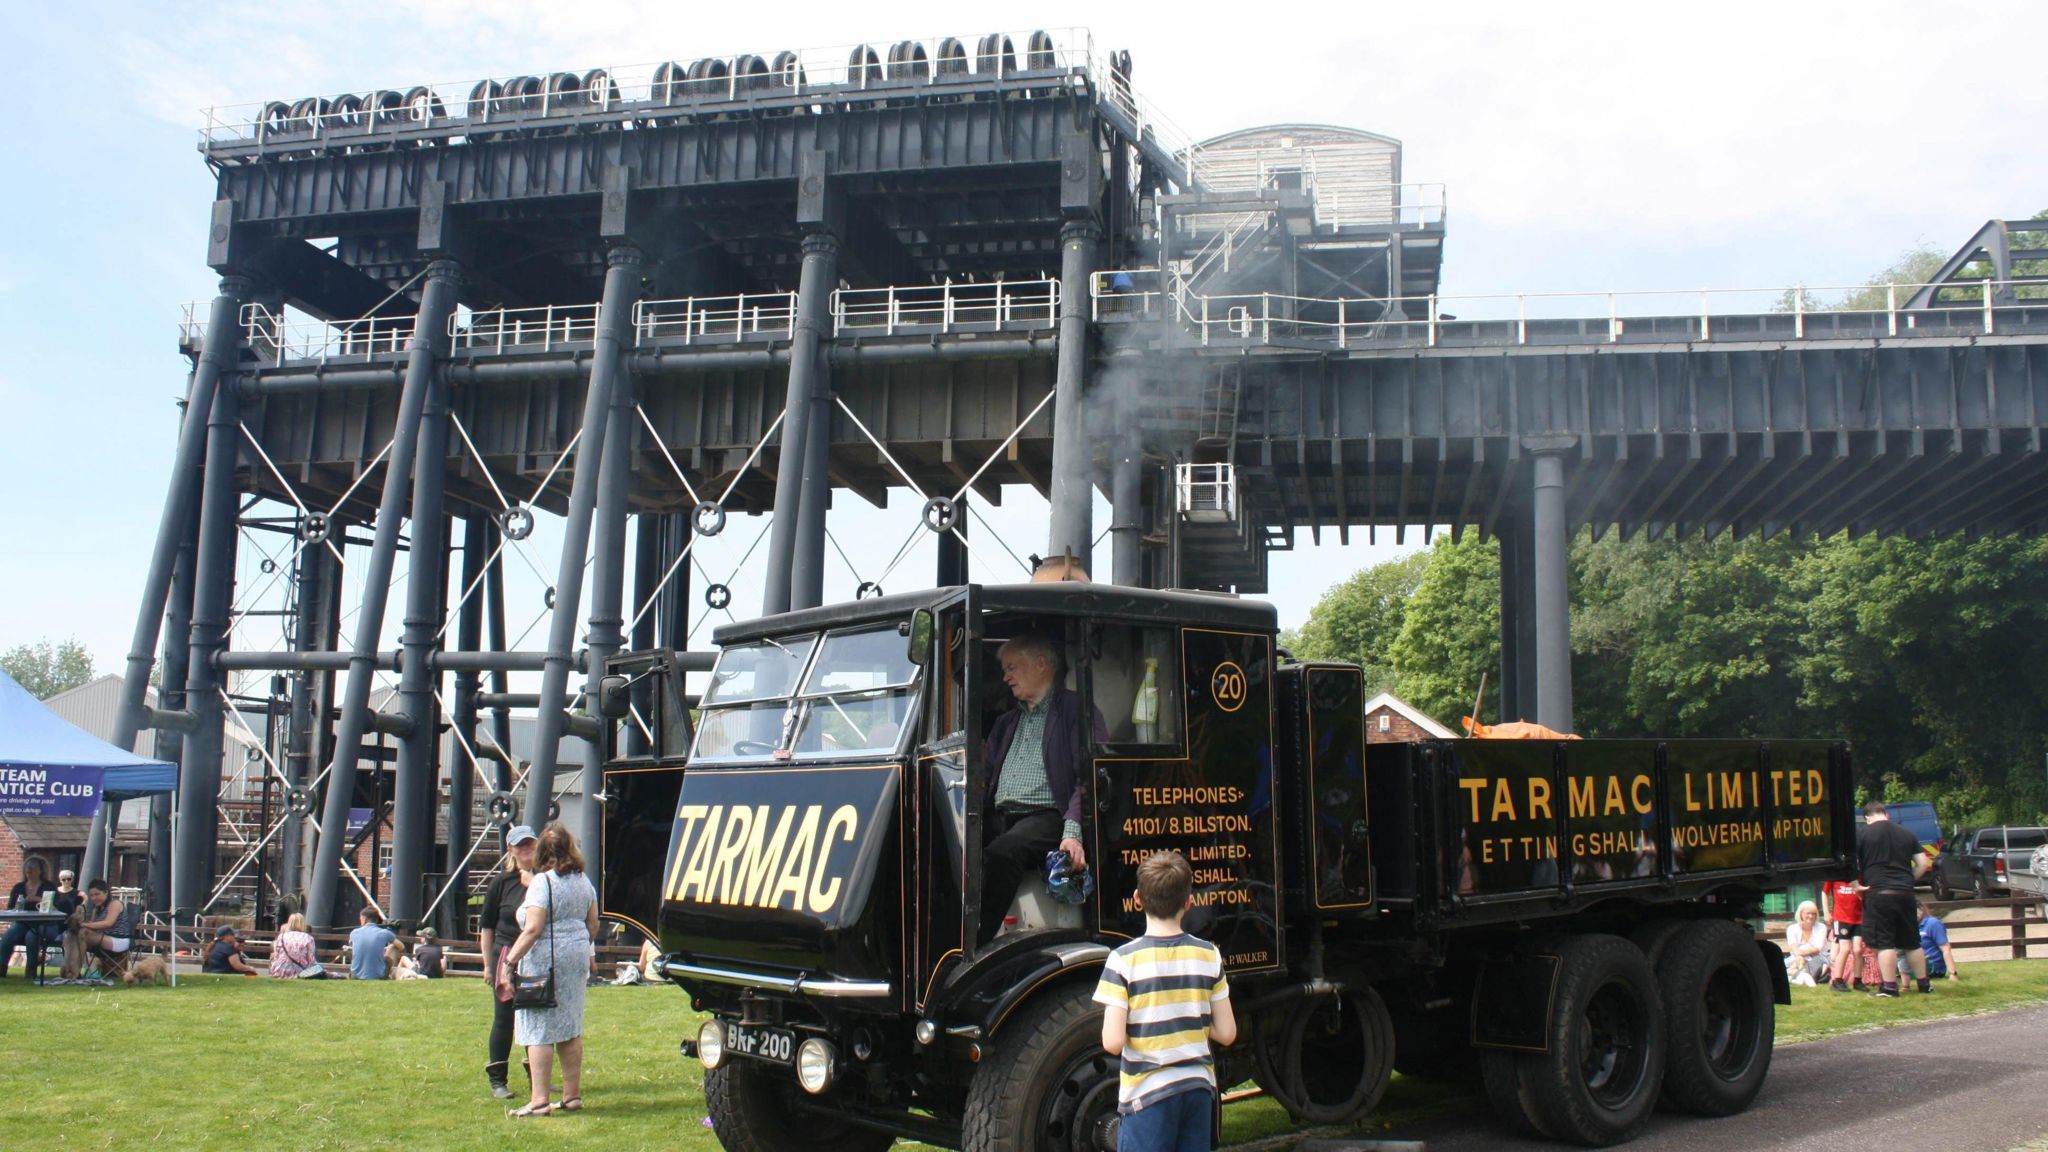 view of heritage vehicle and boat lift